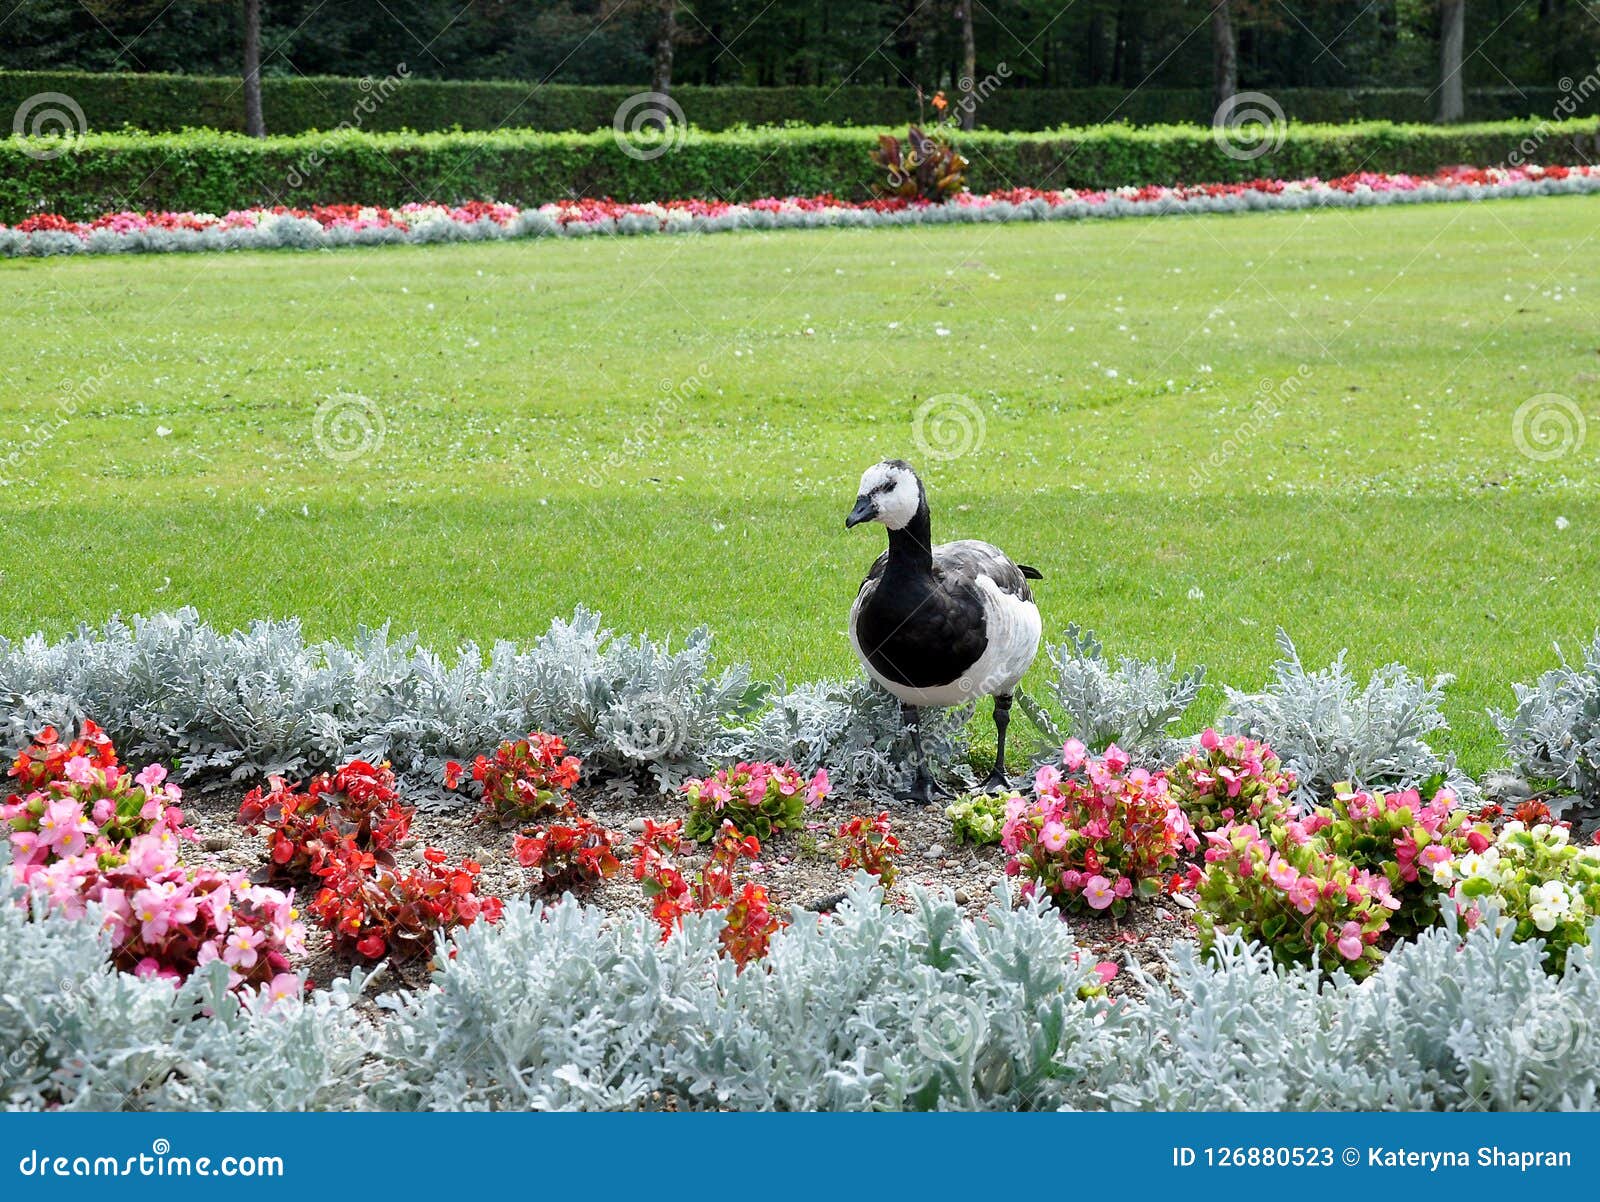 Canadian Goose in a Par, Near of Flowers and Green Grass Stock Image ...